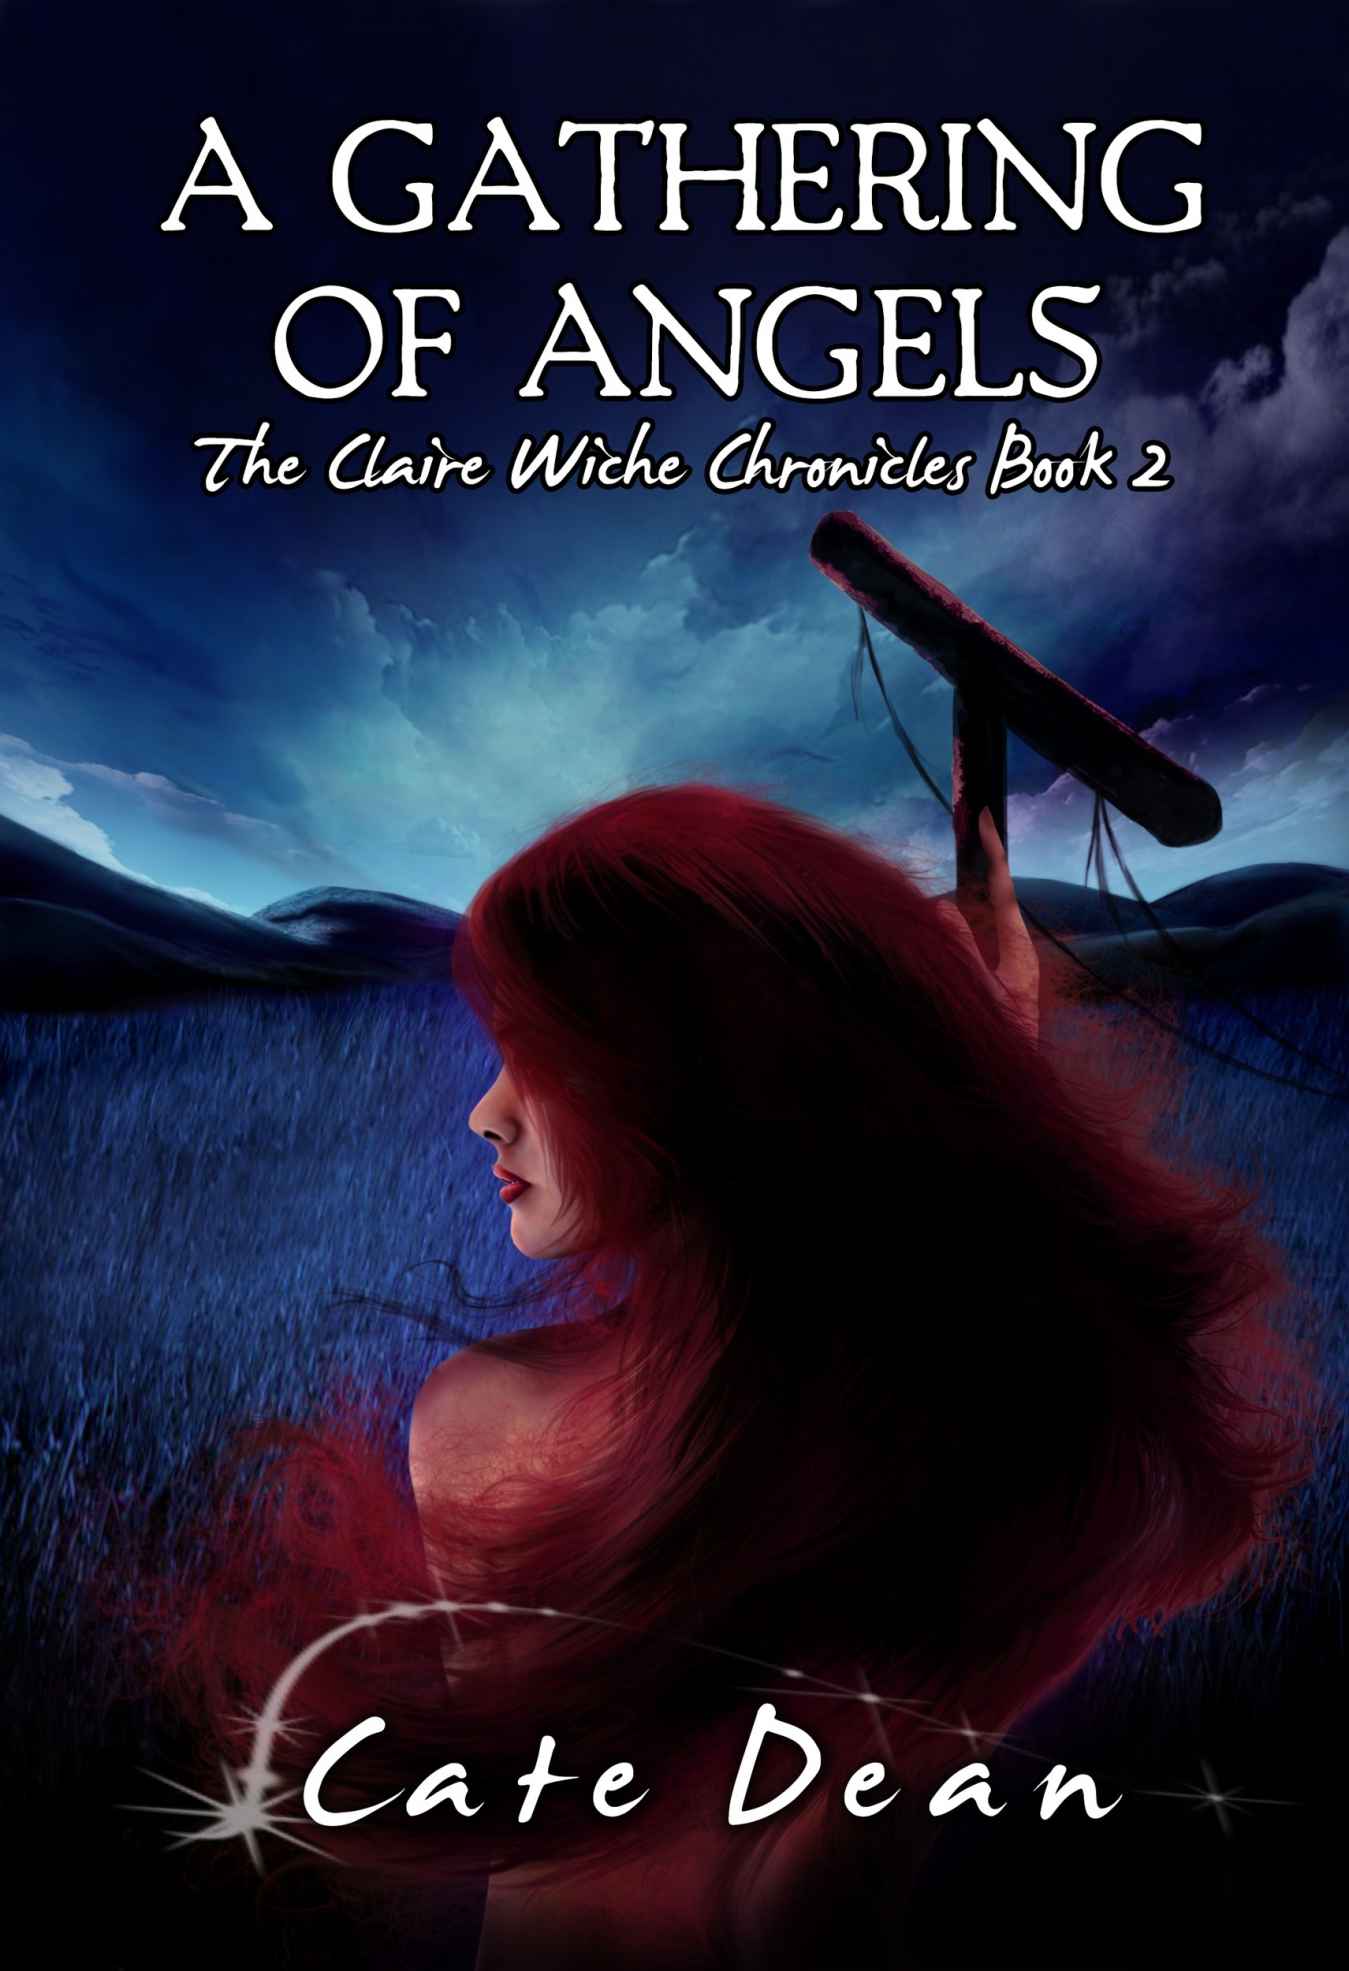 A Gathering of Angels - The Claire Wiche Chronicles Book 2